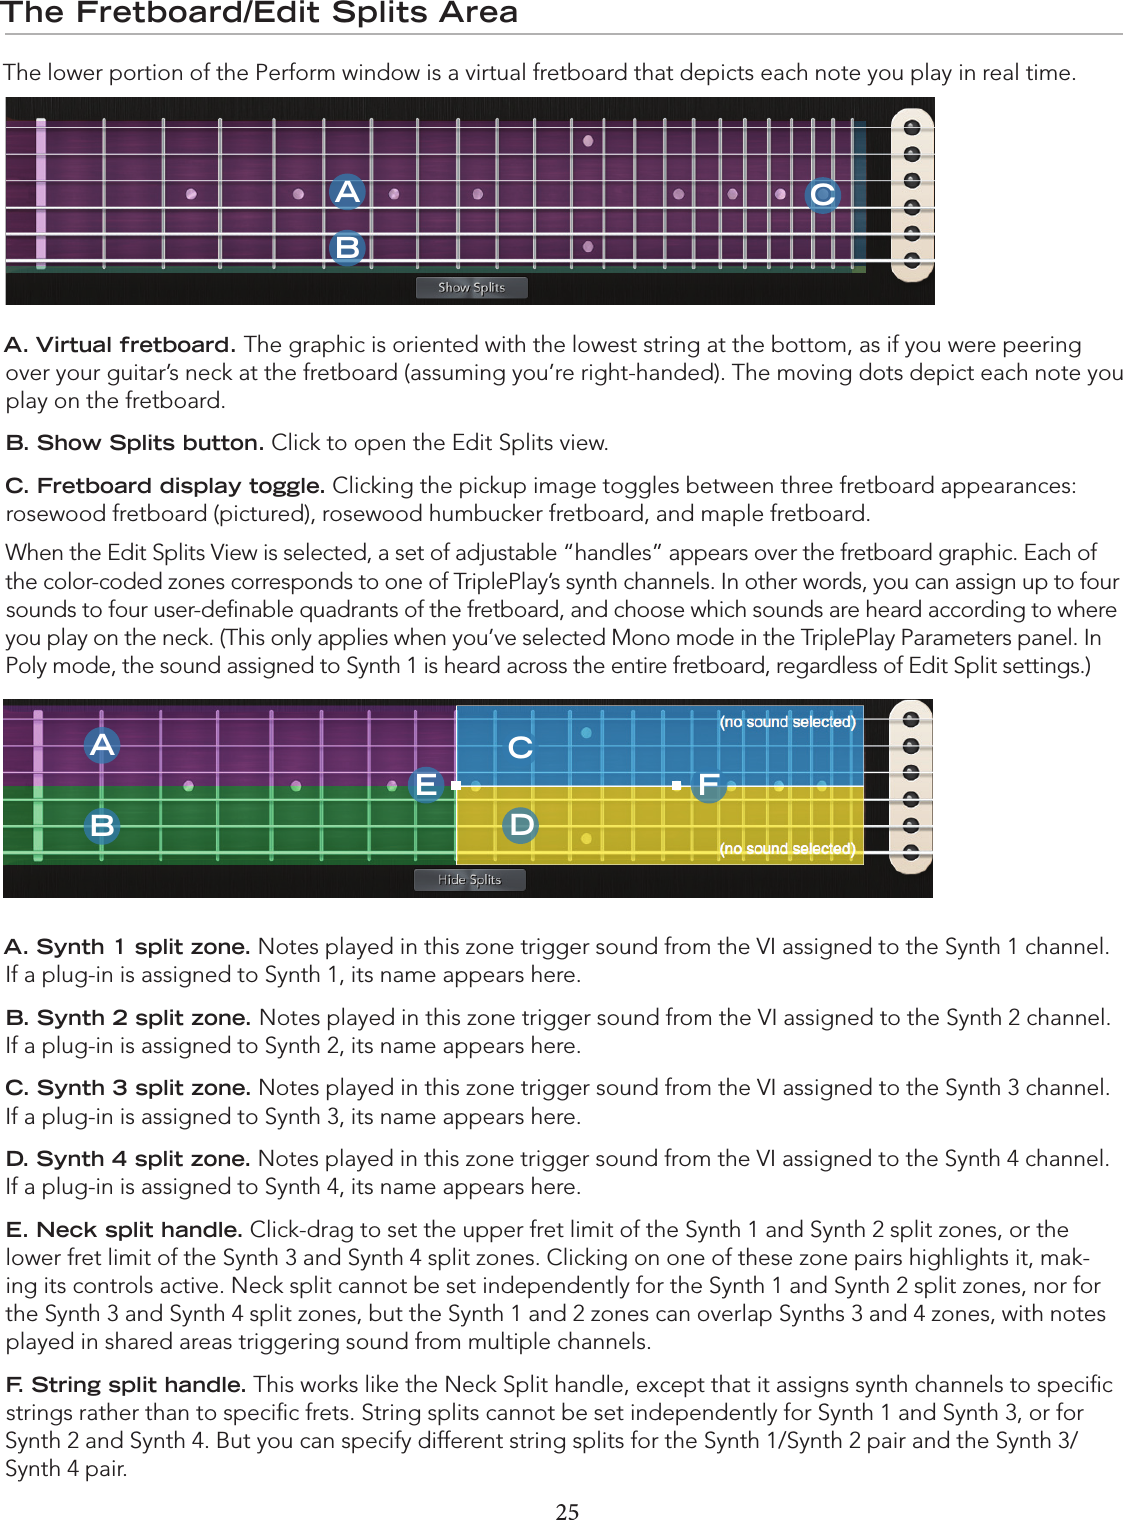 25The Fretboard/Edit Splits AreaThe lower portion of the Perform window is a virtual fretboard that depicts each note you play in real time.       A. Virtual fretboard. The graphic is oriented with the lowest string at the bottom, as if you were peering over your guitar’s neck at the fretboard (assuming you’re right-handed). The moving dots depict each note you play on the fretboard.B. Show Splits button. Click to open the Edit Splits view.C. Fretboard display toggle. Clicking the pickup image toggles between three fretboard appearances: rosewood fretboard (pictured), rosewood humbucker fretboard, and maple fretboard.When the Edit Splits View is selected, a set of adjustable “handles” appears over the fretboard graphic. Each of the color-coded zones corresponds to one of TriplePlay’s synth channels. In other words, you can assign up to four sounds to four user-deﬁnable quadrants of the fretboard, and choose which sounds are heard according to where you play on the neck. (This only applies when you’ve selected Mono mode in the TriplePlay Parameters panel. In Poly mode, the sound assigned to Synth 1 is heard across the entire fretboard, regardless of Edit Split settings.) A. Synth 1 split zone. Notes played in this zone trigger sound from the VI assigned to the Synth 1 channel.  If a plug-in is assigned to Synth 1, its name appears here. B. Synth 2 split zone. Notes played in this zone trigger sound from the VI assigned to the Synth 2 channel. If a plug-in is assigned to Synth 2, its name appears here.C. Synth 3 split zone. Notes played in this zone trigger sound from the VI assigned to the Synth 3 channel.  If a plug-in is assigned to Synth 3, its name appears here.D. Synth 4 split zone. Notes played in this zone trigger sound from the VI assigned to the Synth 4 channel.  If a plug-in is assigned to Synth 4, its name appears here.E. Neck split handle. Click-drag to set the upper fret limit of the Synth 1 and Synth 2 split zones, or the lower fret limit of the Synth 3 and Synth 4 split zones. Clicking on one of these zone pairs highlights it, mak-ing its controls active. Neck split cannot be set independently for the Synth 1 and Synth 2 split zones, nor for the Synth 3 and Synth 4 split zones, but the Synth 1 and 2 zones can overlap Synths 3 and 4 zones, with notes played in shared areas triggering sound from multiple channels.F. String split handle. This works like the Neck Split handle, except that it assigns synth channels to speciﬁc strings rather than to speciﬁc frets. String splits cannot be set independently for Synth 1 and Synth 3, or for Synth 2 and Synth 4. But you can specify different string splits for the Synth 1/Synth 2 pair and the Synth 3/Synth 4 pair.ABCABCDE F